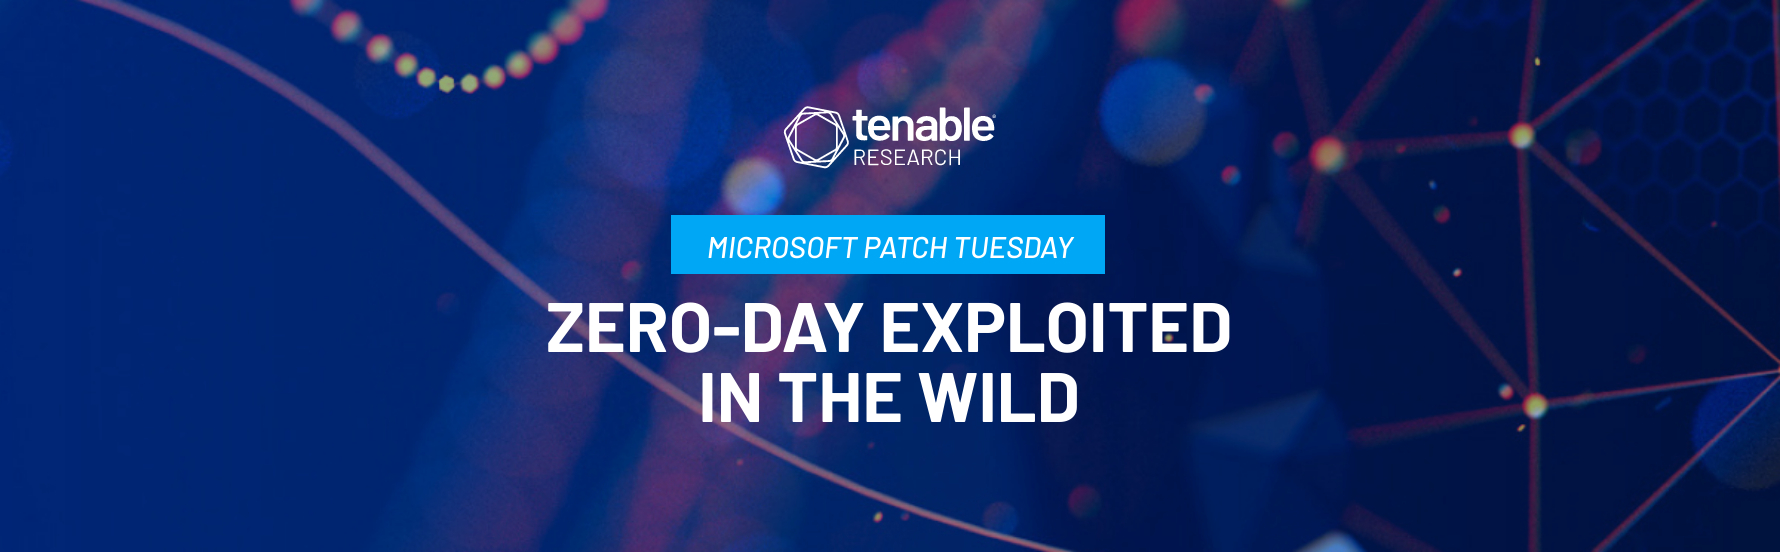 Microsoft Patch Tuesday for November 2022 includes patches for four zero-day vulnerabilities exploited in the wild.